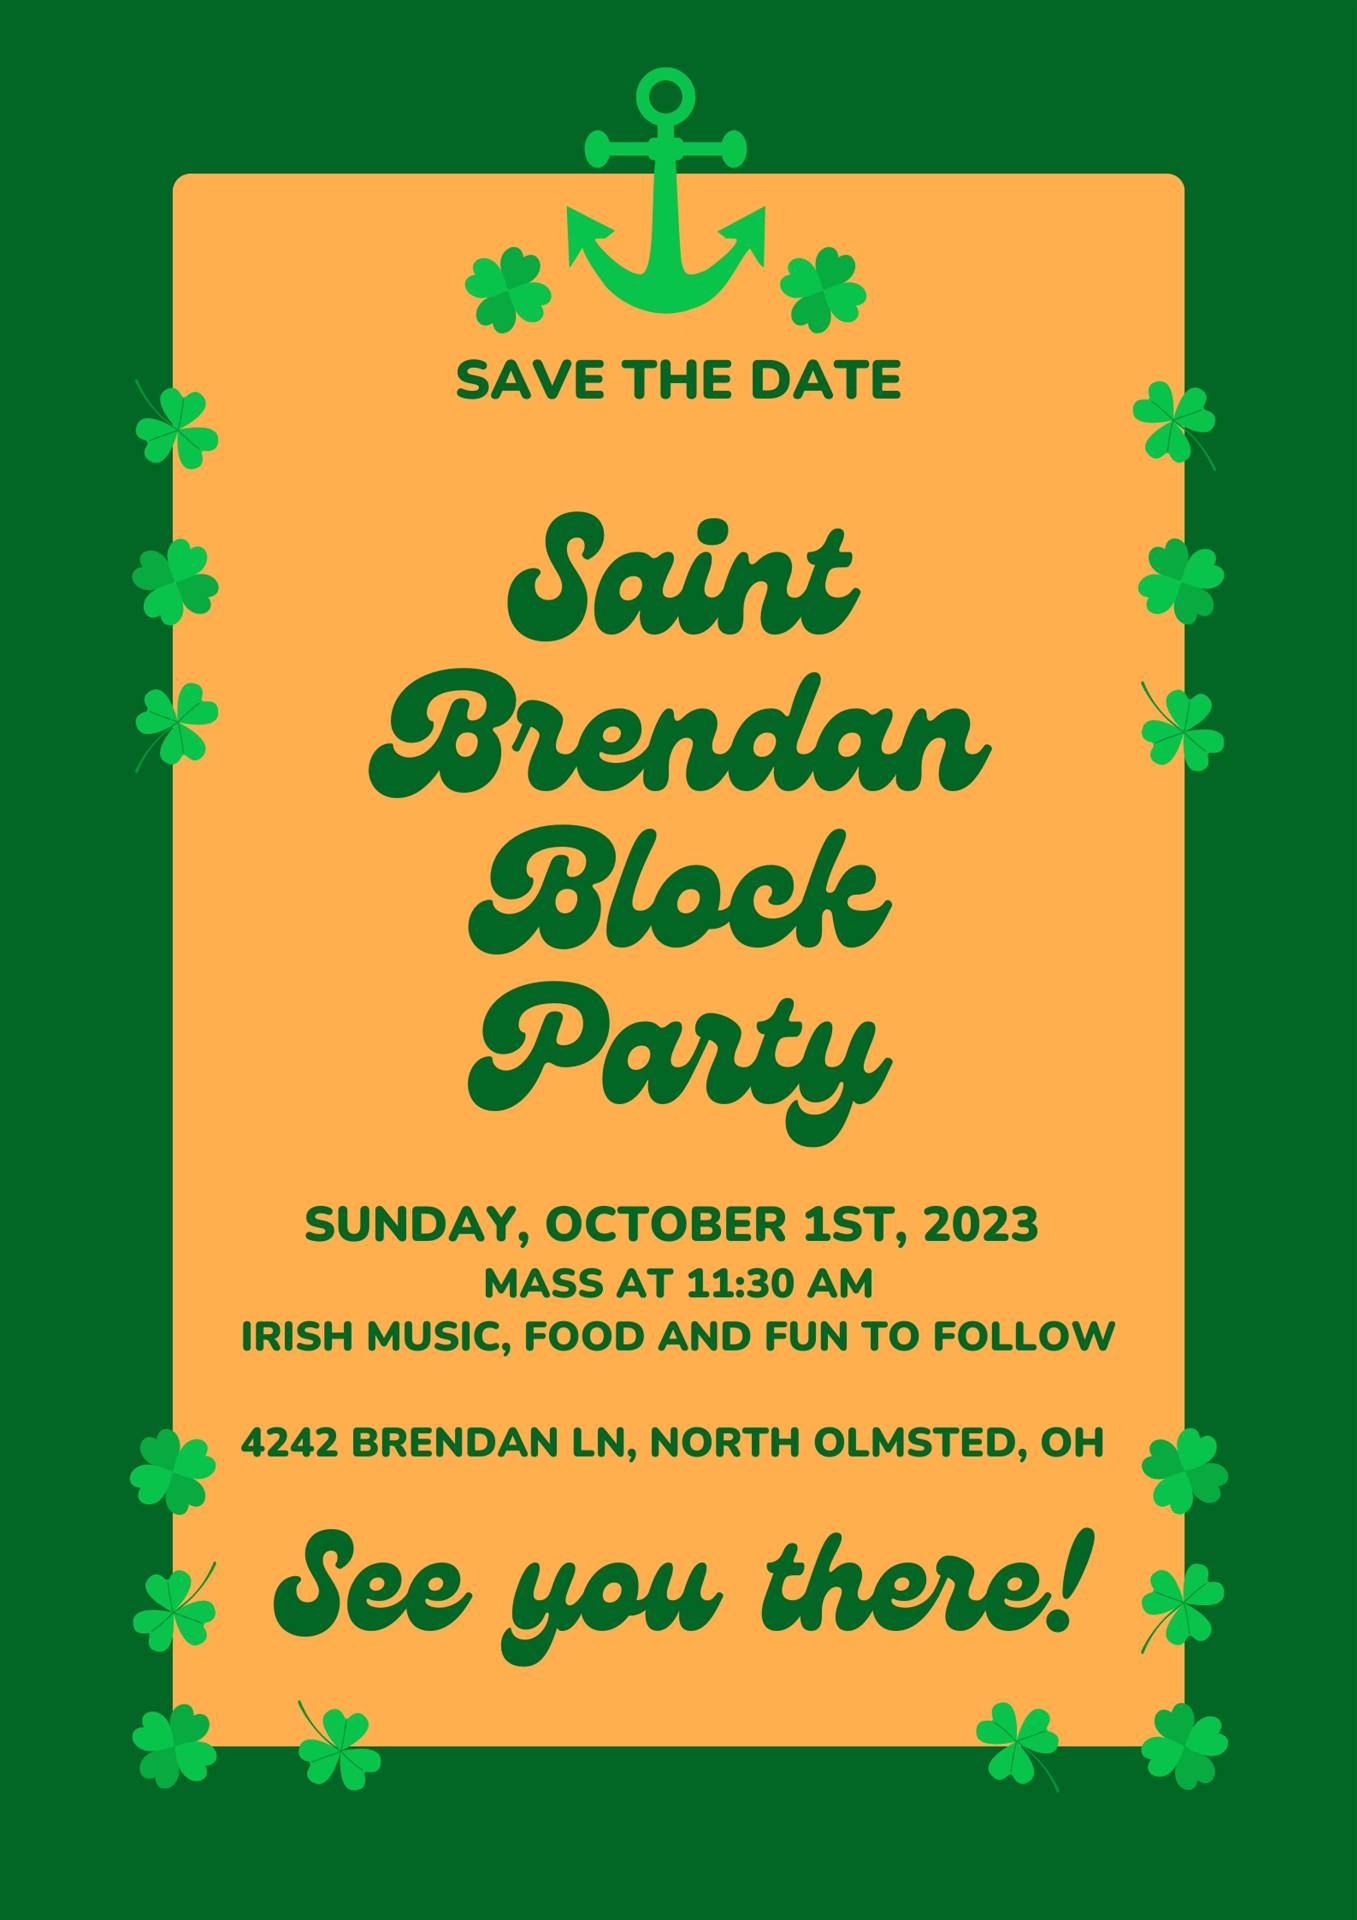 block party october 1 starting with 11:30 mass